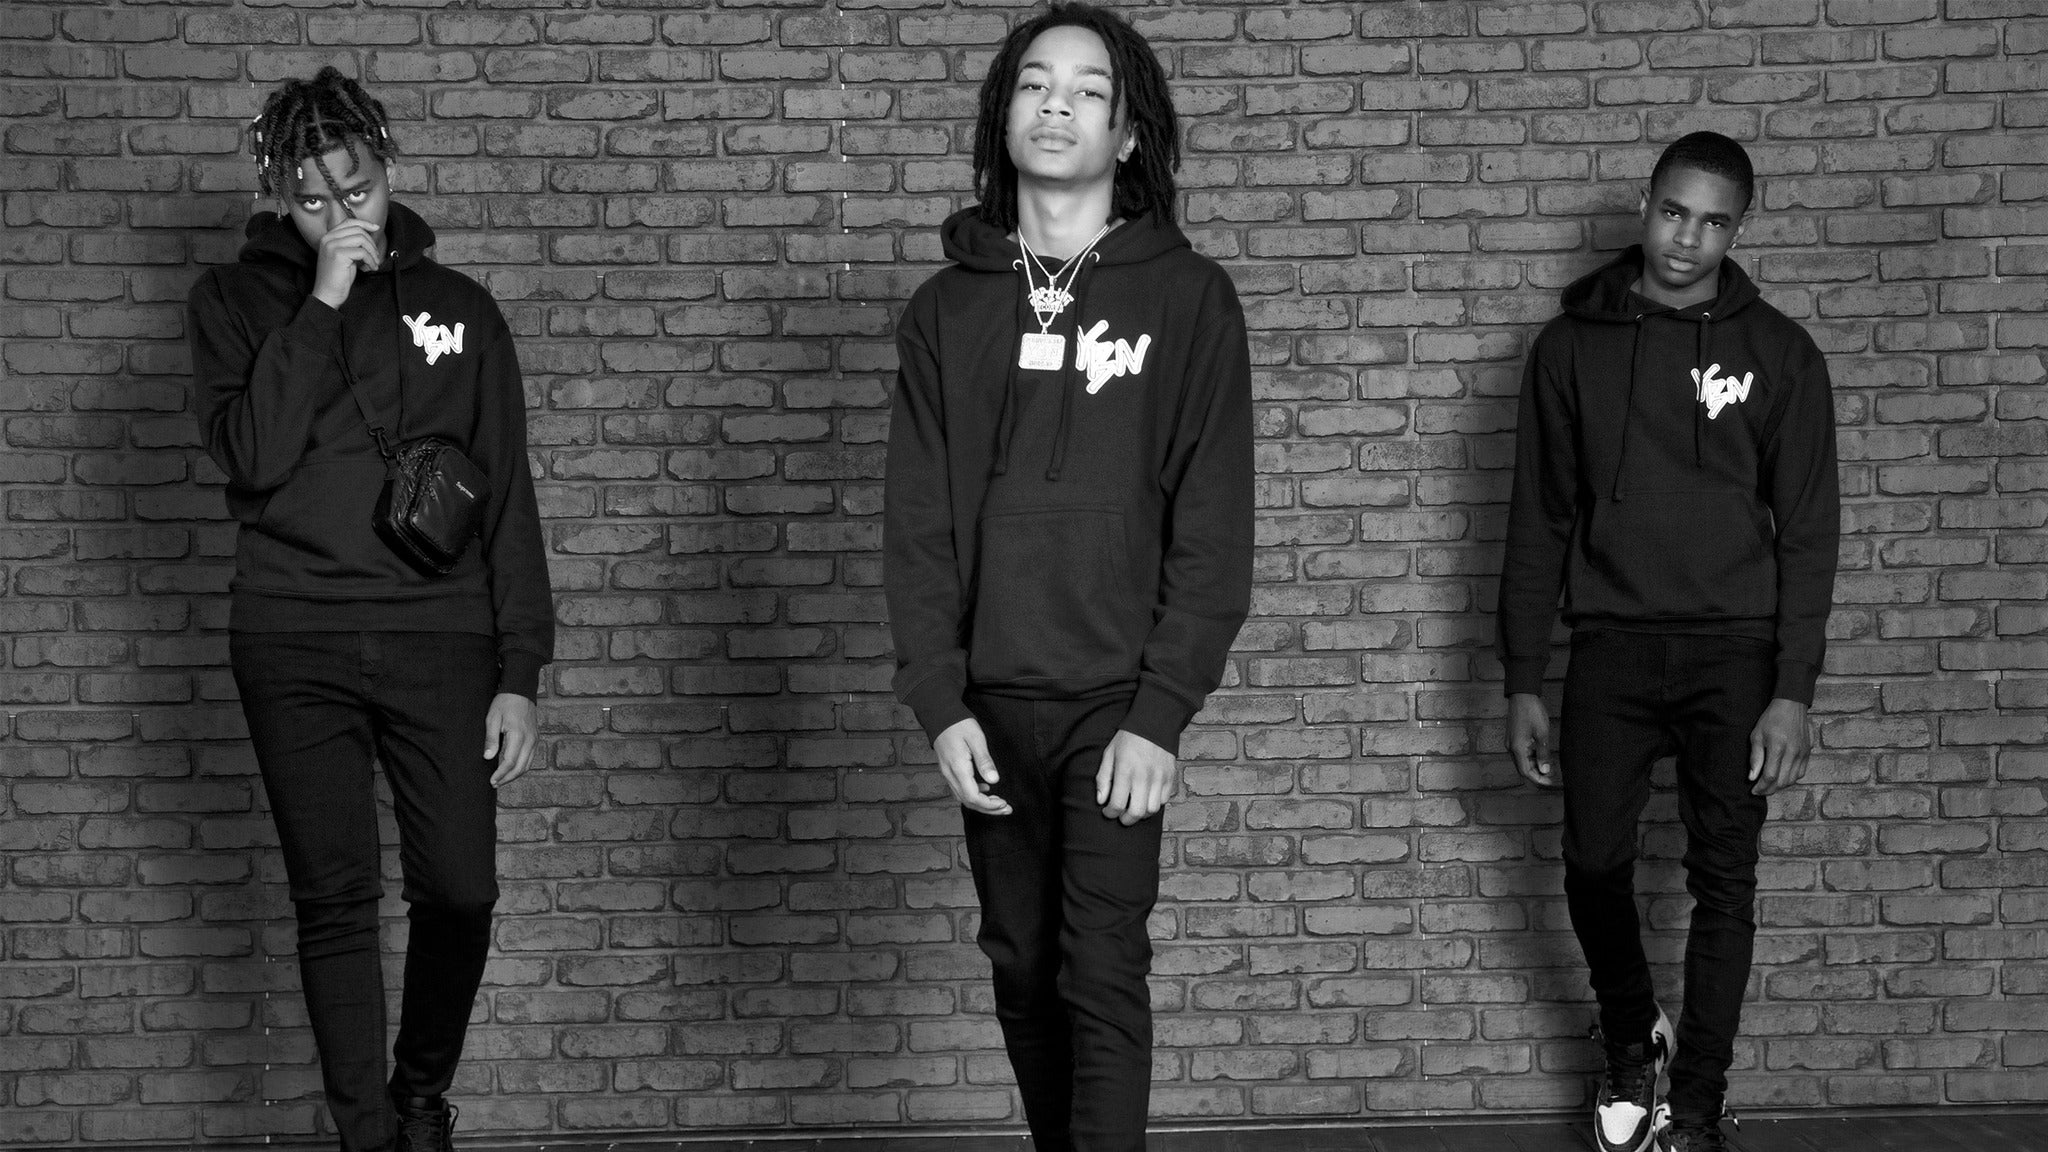 The YBN Takeover Tour With YBN Nahmir, YBN Almighty Jay, YBN Cordae in Los Angeles event information